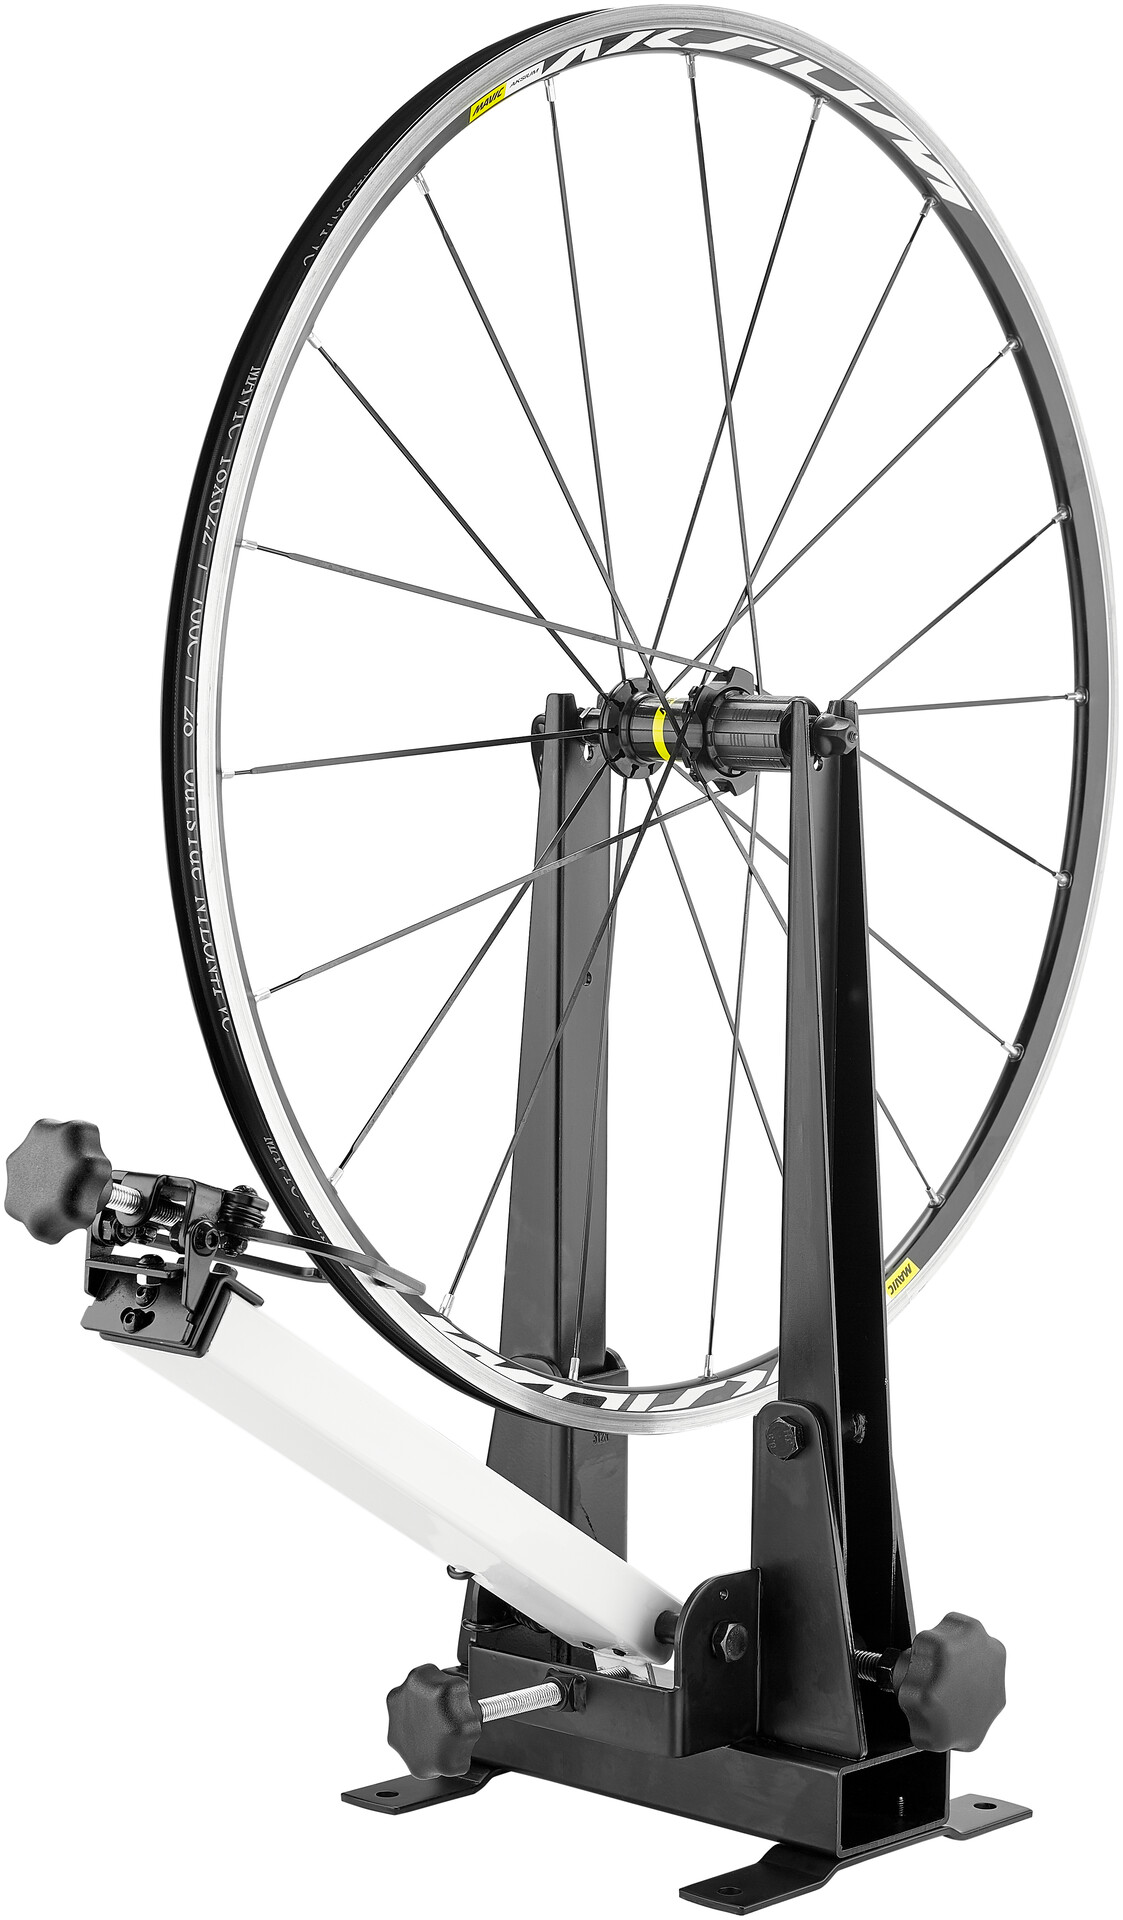 truing a wheel without a stand